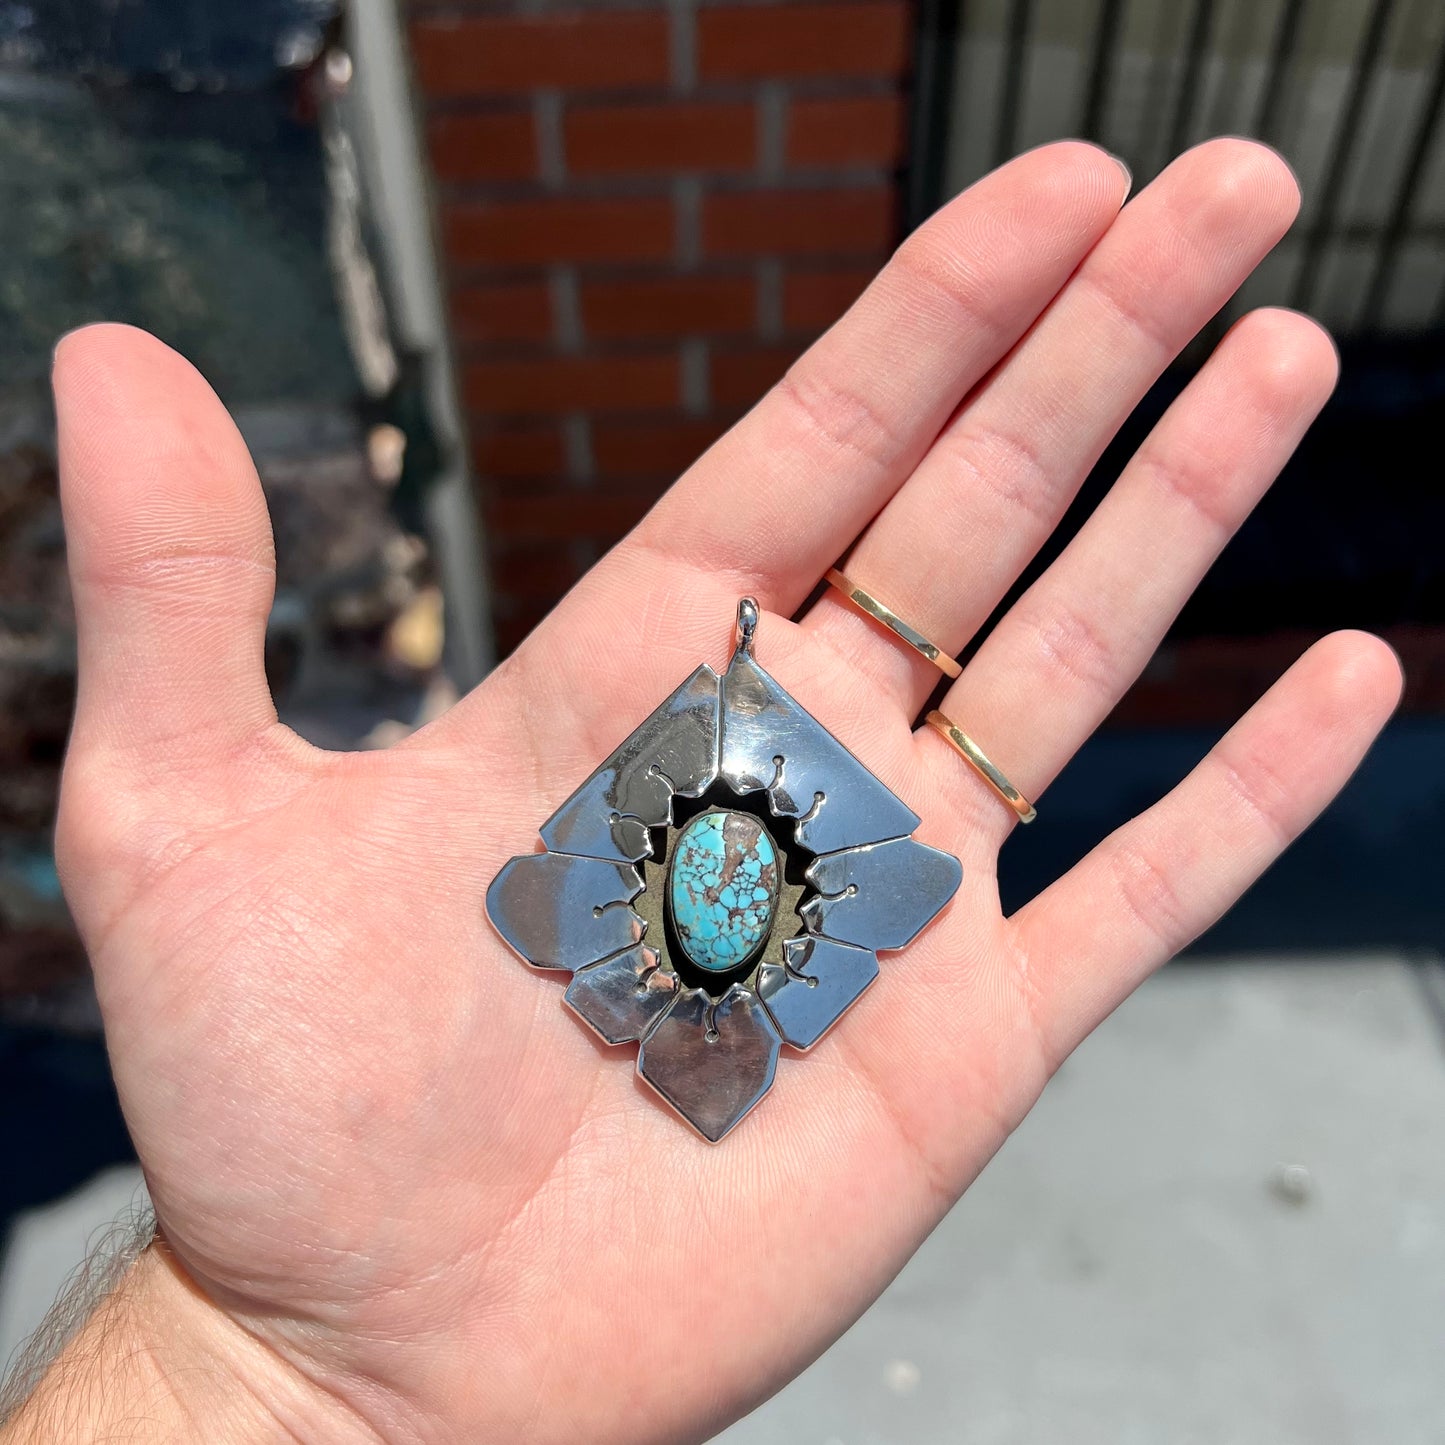 A handmade Mayan Indian pendant set with an oval cut turquoise stone from the Number 8 Mine.